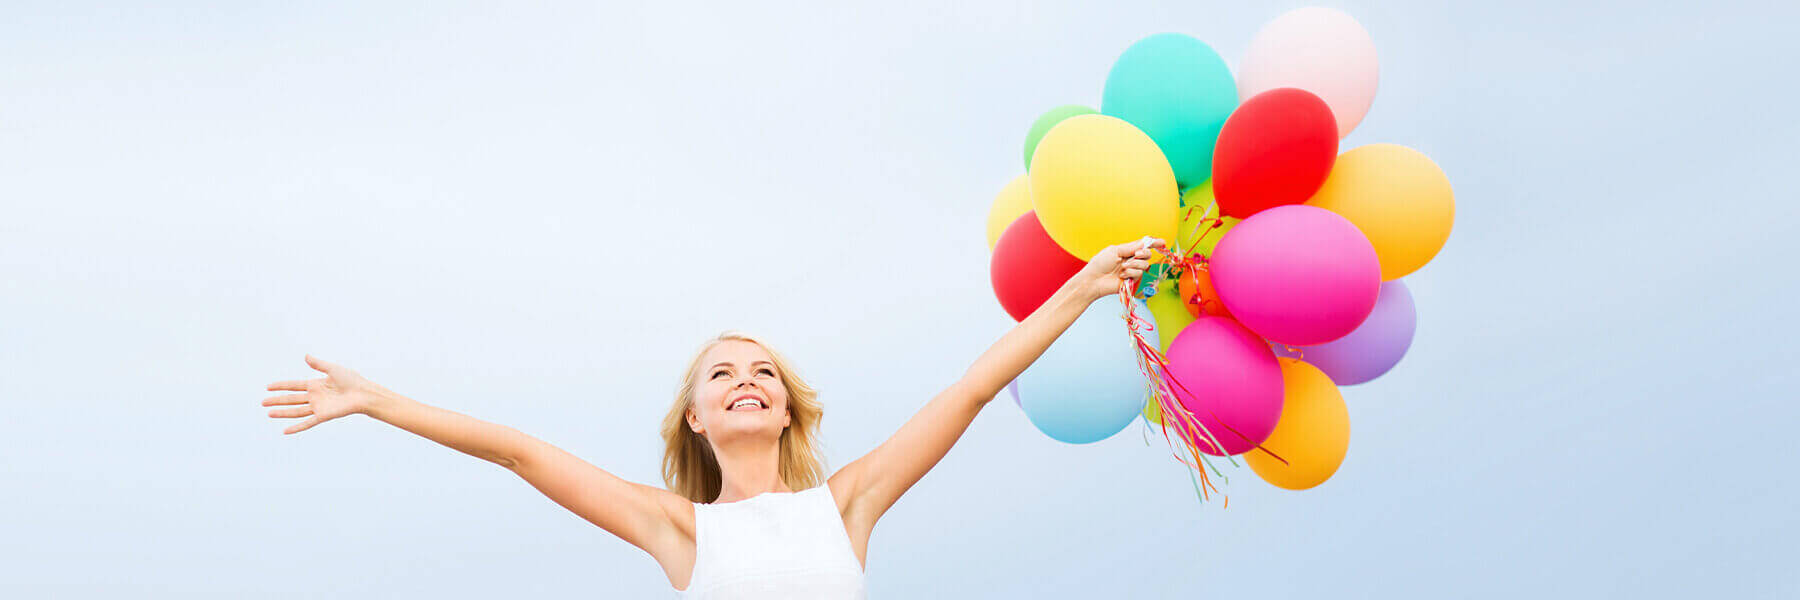 https://happycards.com/wp-content/uploads/2020/05/happy-lady-with-balloons.jpg